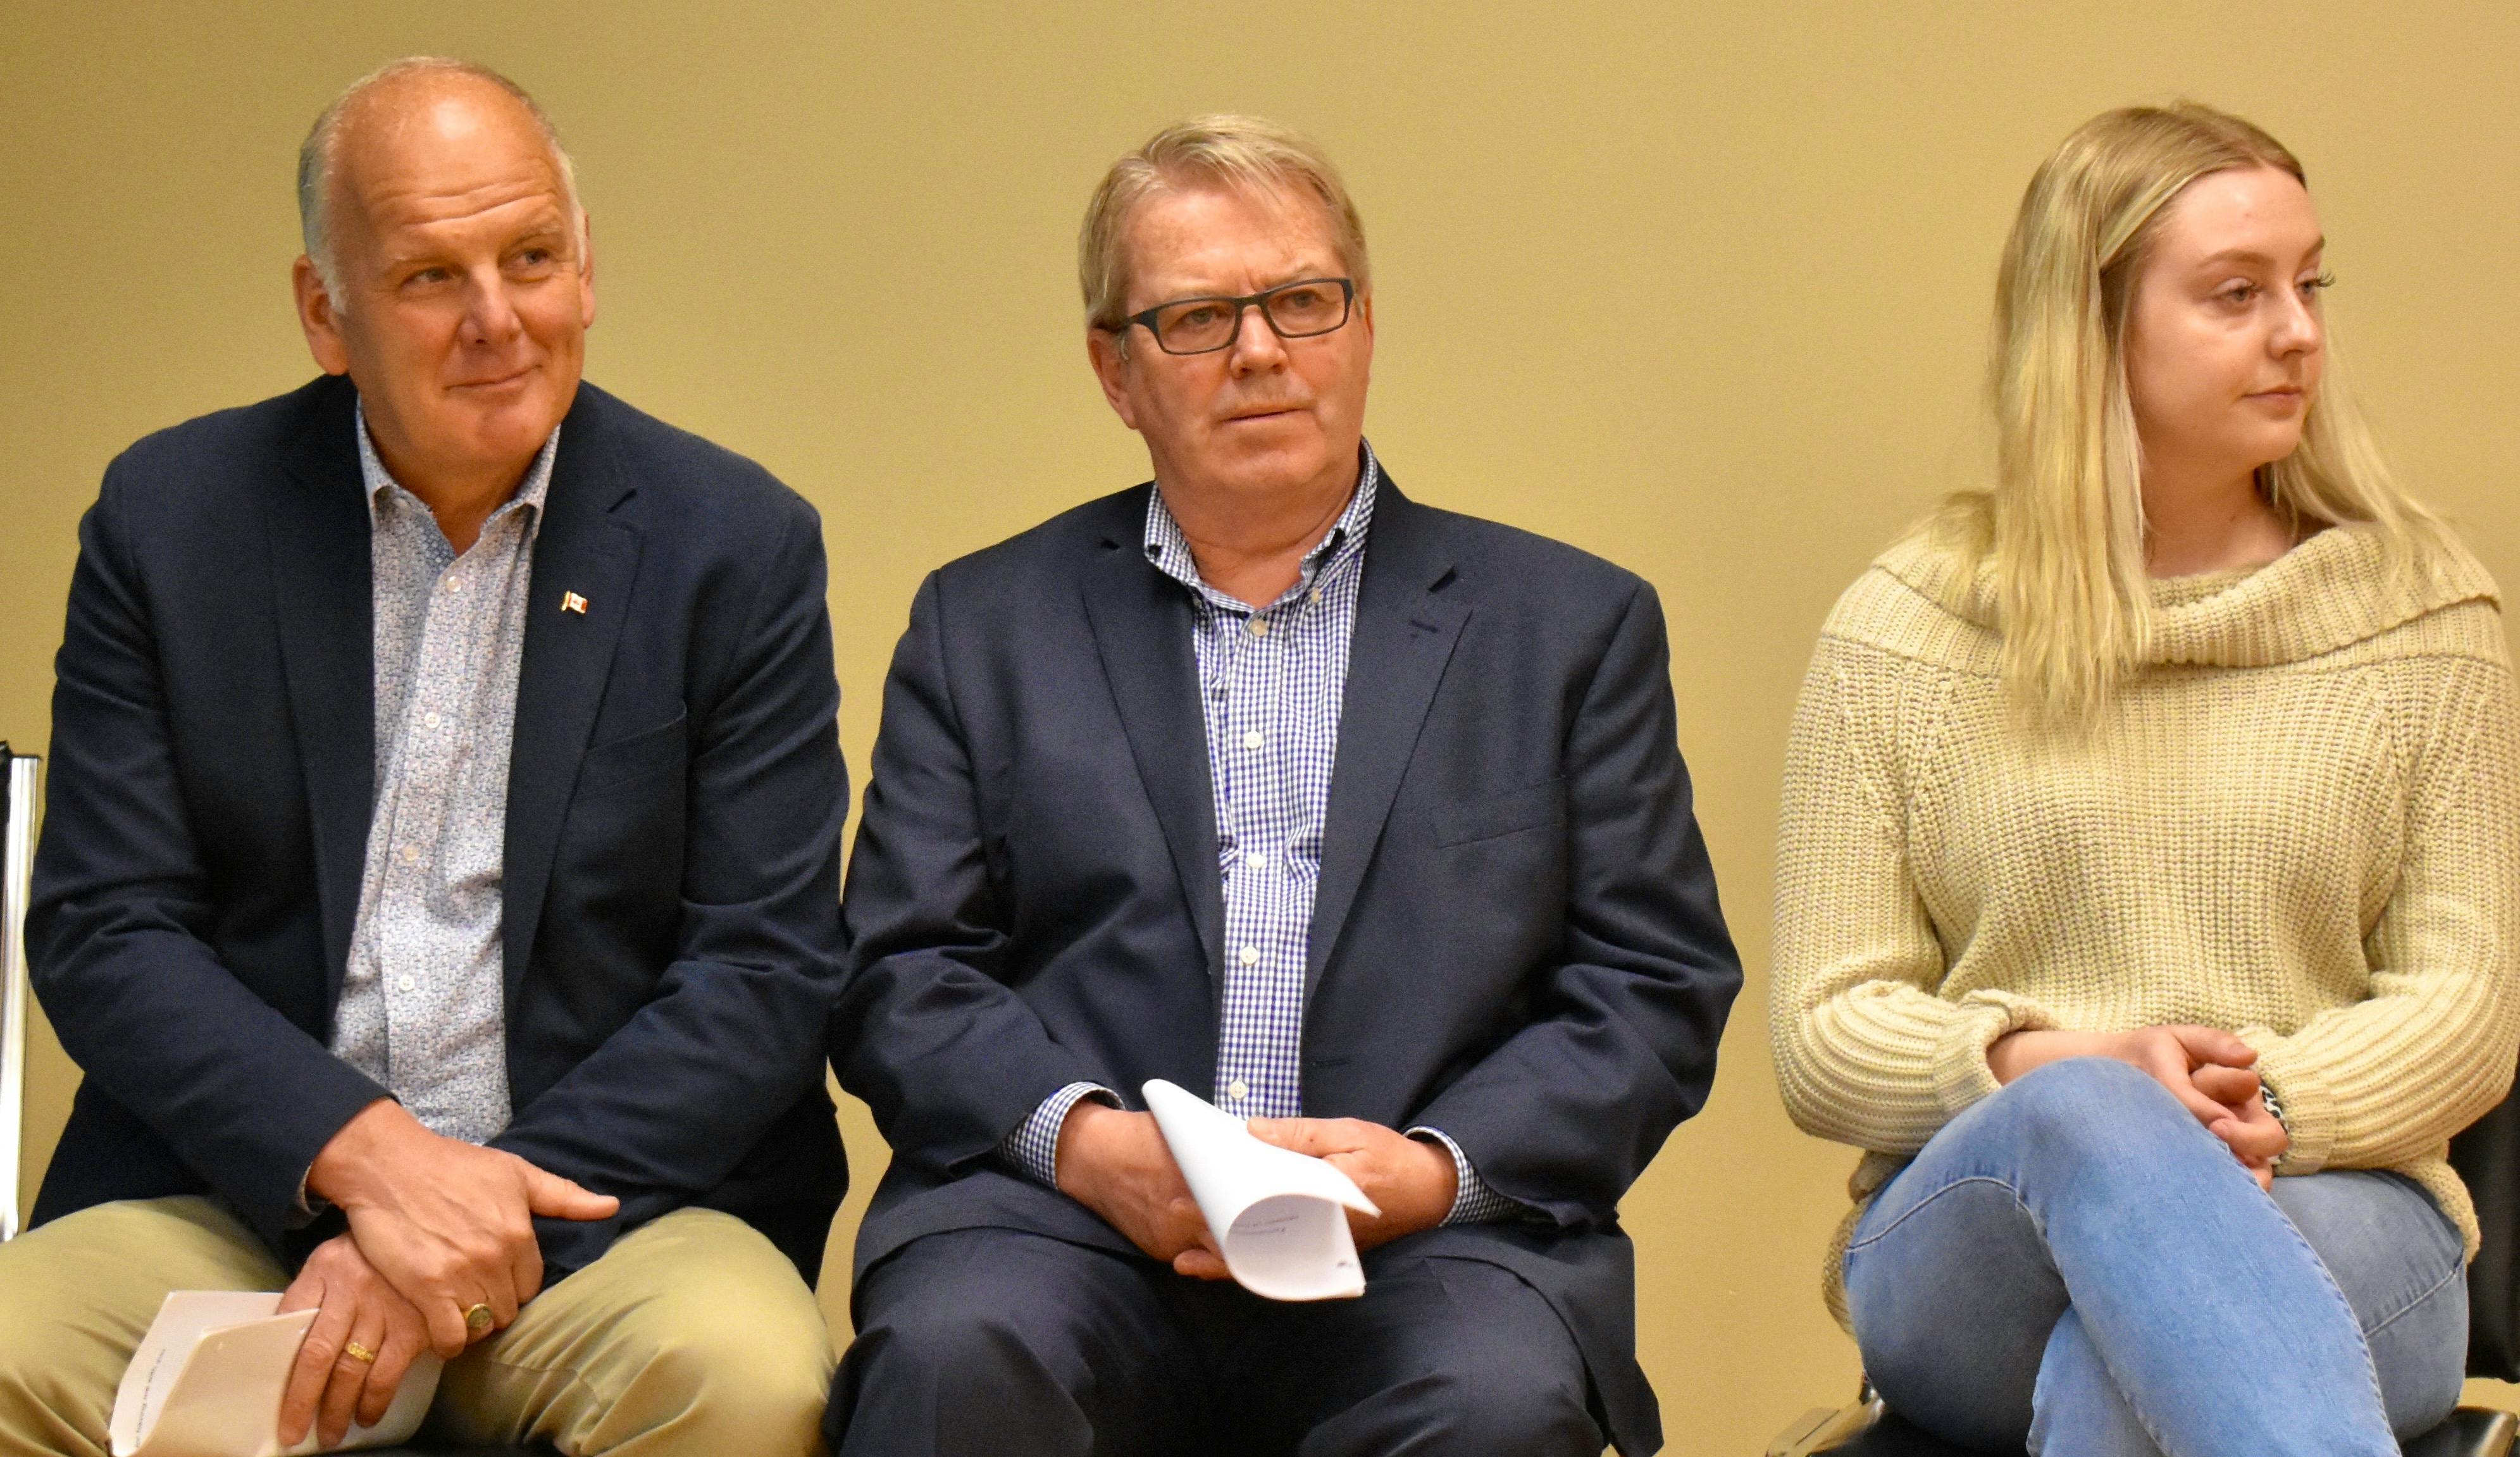 Cape Breton University student Danielle Pyke, right, Sydney-Victoria MP Mark Eyking, left, and Cape Breton-Canso MP Rodger Cuzner, listen to YMCA of Cape Breton chief executive officer Andre Gallant during Tuesday’s kickoff of the 2019 Canada Summer Jobs program at the downtown Sydney YMCA. Pyke spent last summer working at the Y as a summer day camp counsellor, while the pair of Cape Breton MPs were on hand to announce the start of the program’s 2019 hiring season.